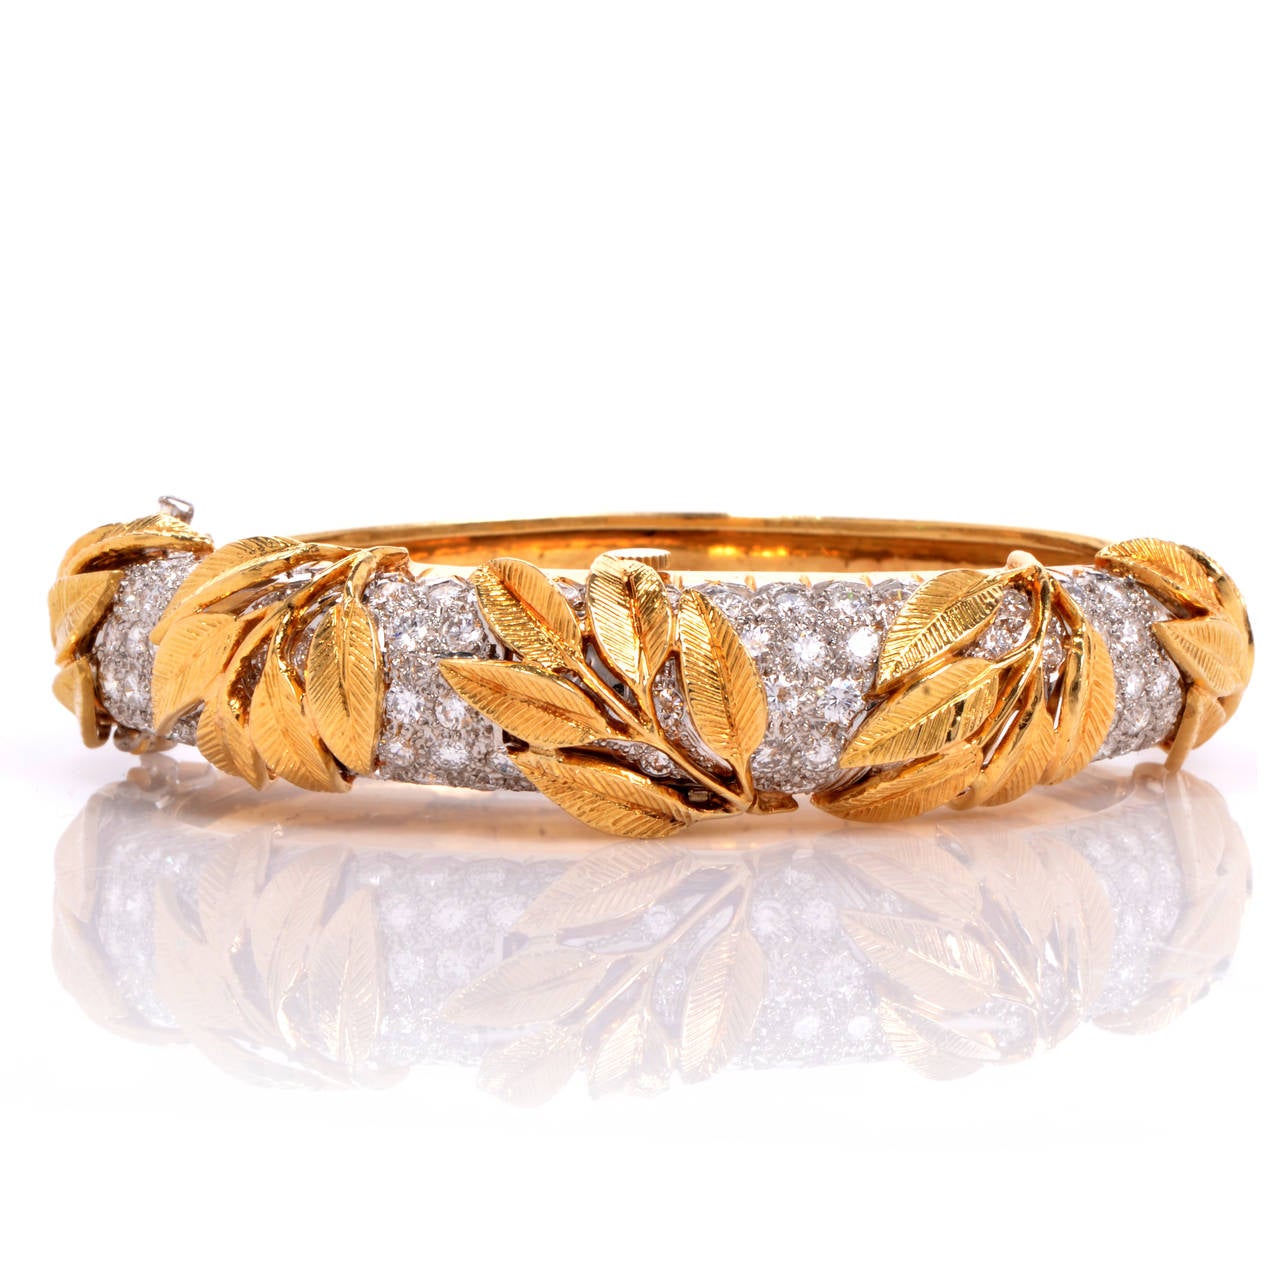 Shimmering with elegance and style, this watch bangle bracelet takes the idea of your jewelry being versatile to a new level! Finely crafted in solid 18K yellow gold and solid platinum. This bangle bracelet has gorgeous pave diamonds set in the